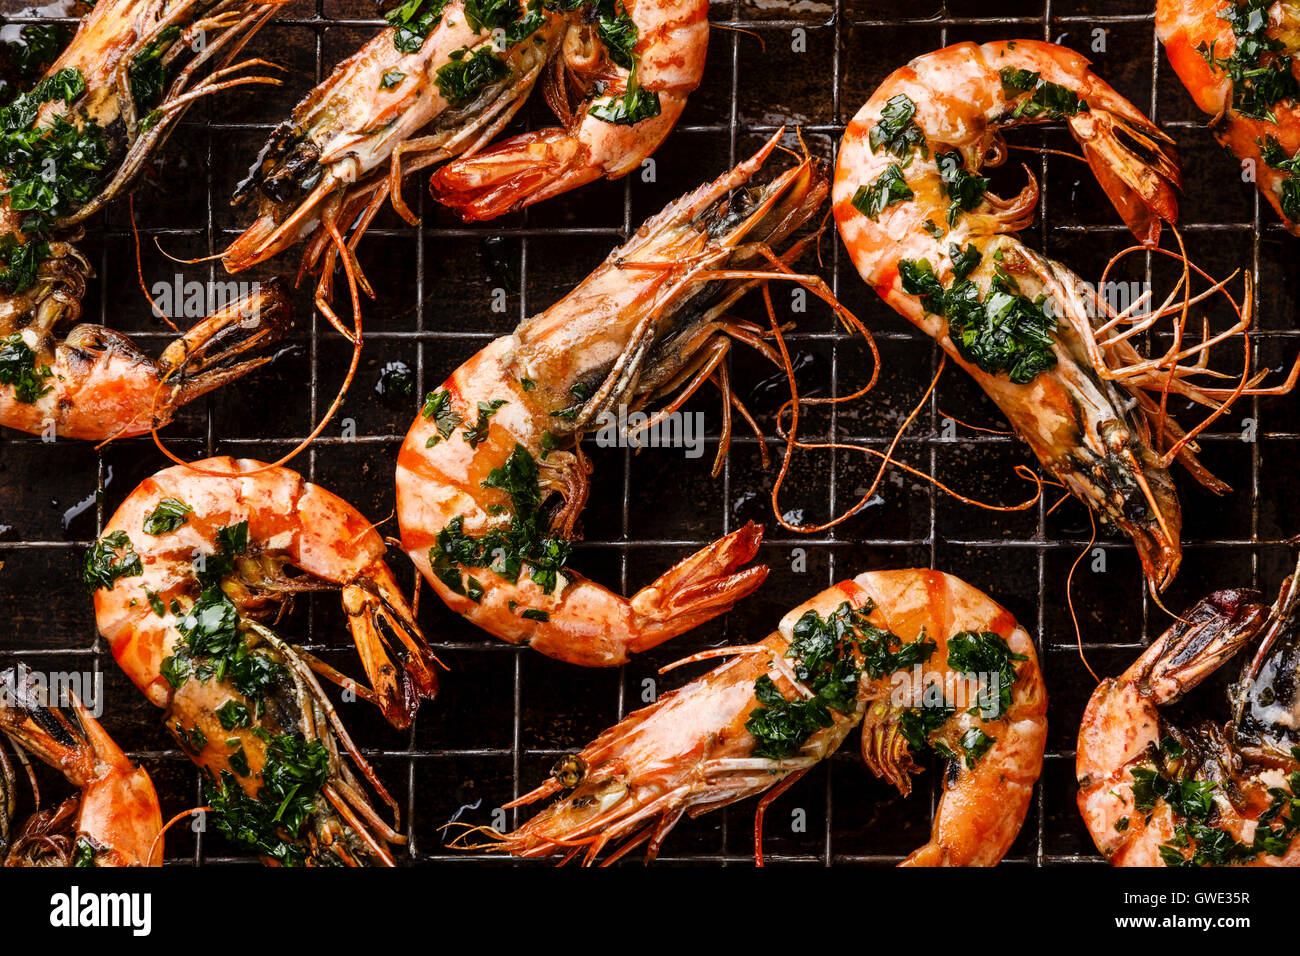 Roasted tiger prawns with green sauce on metal baking sheet background close up Stock Photo